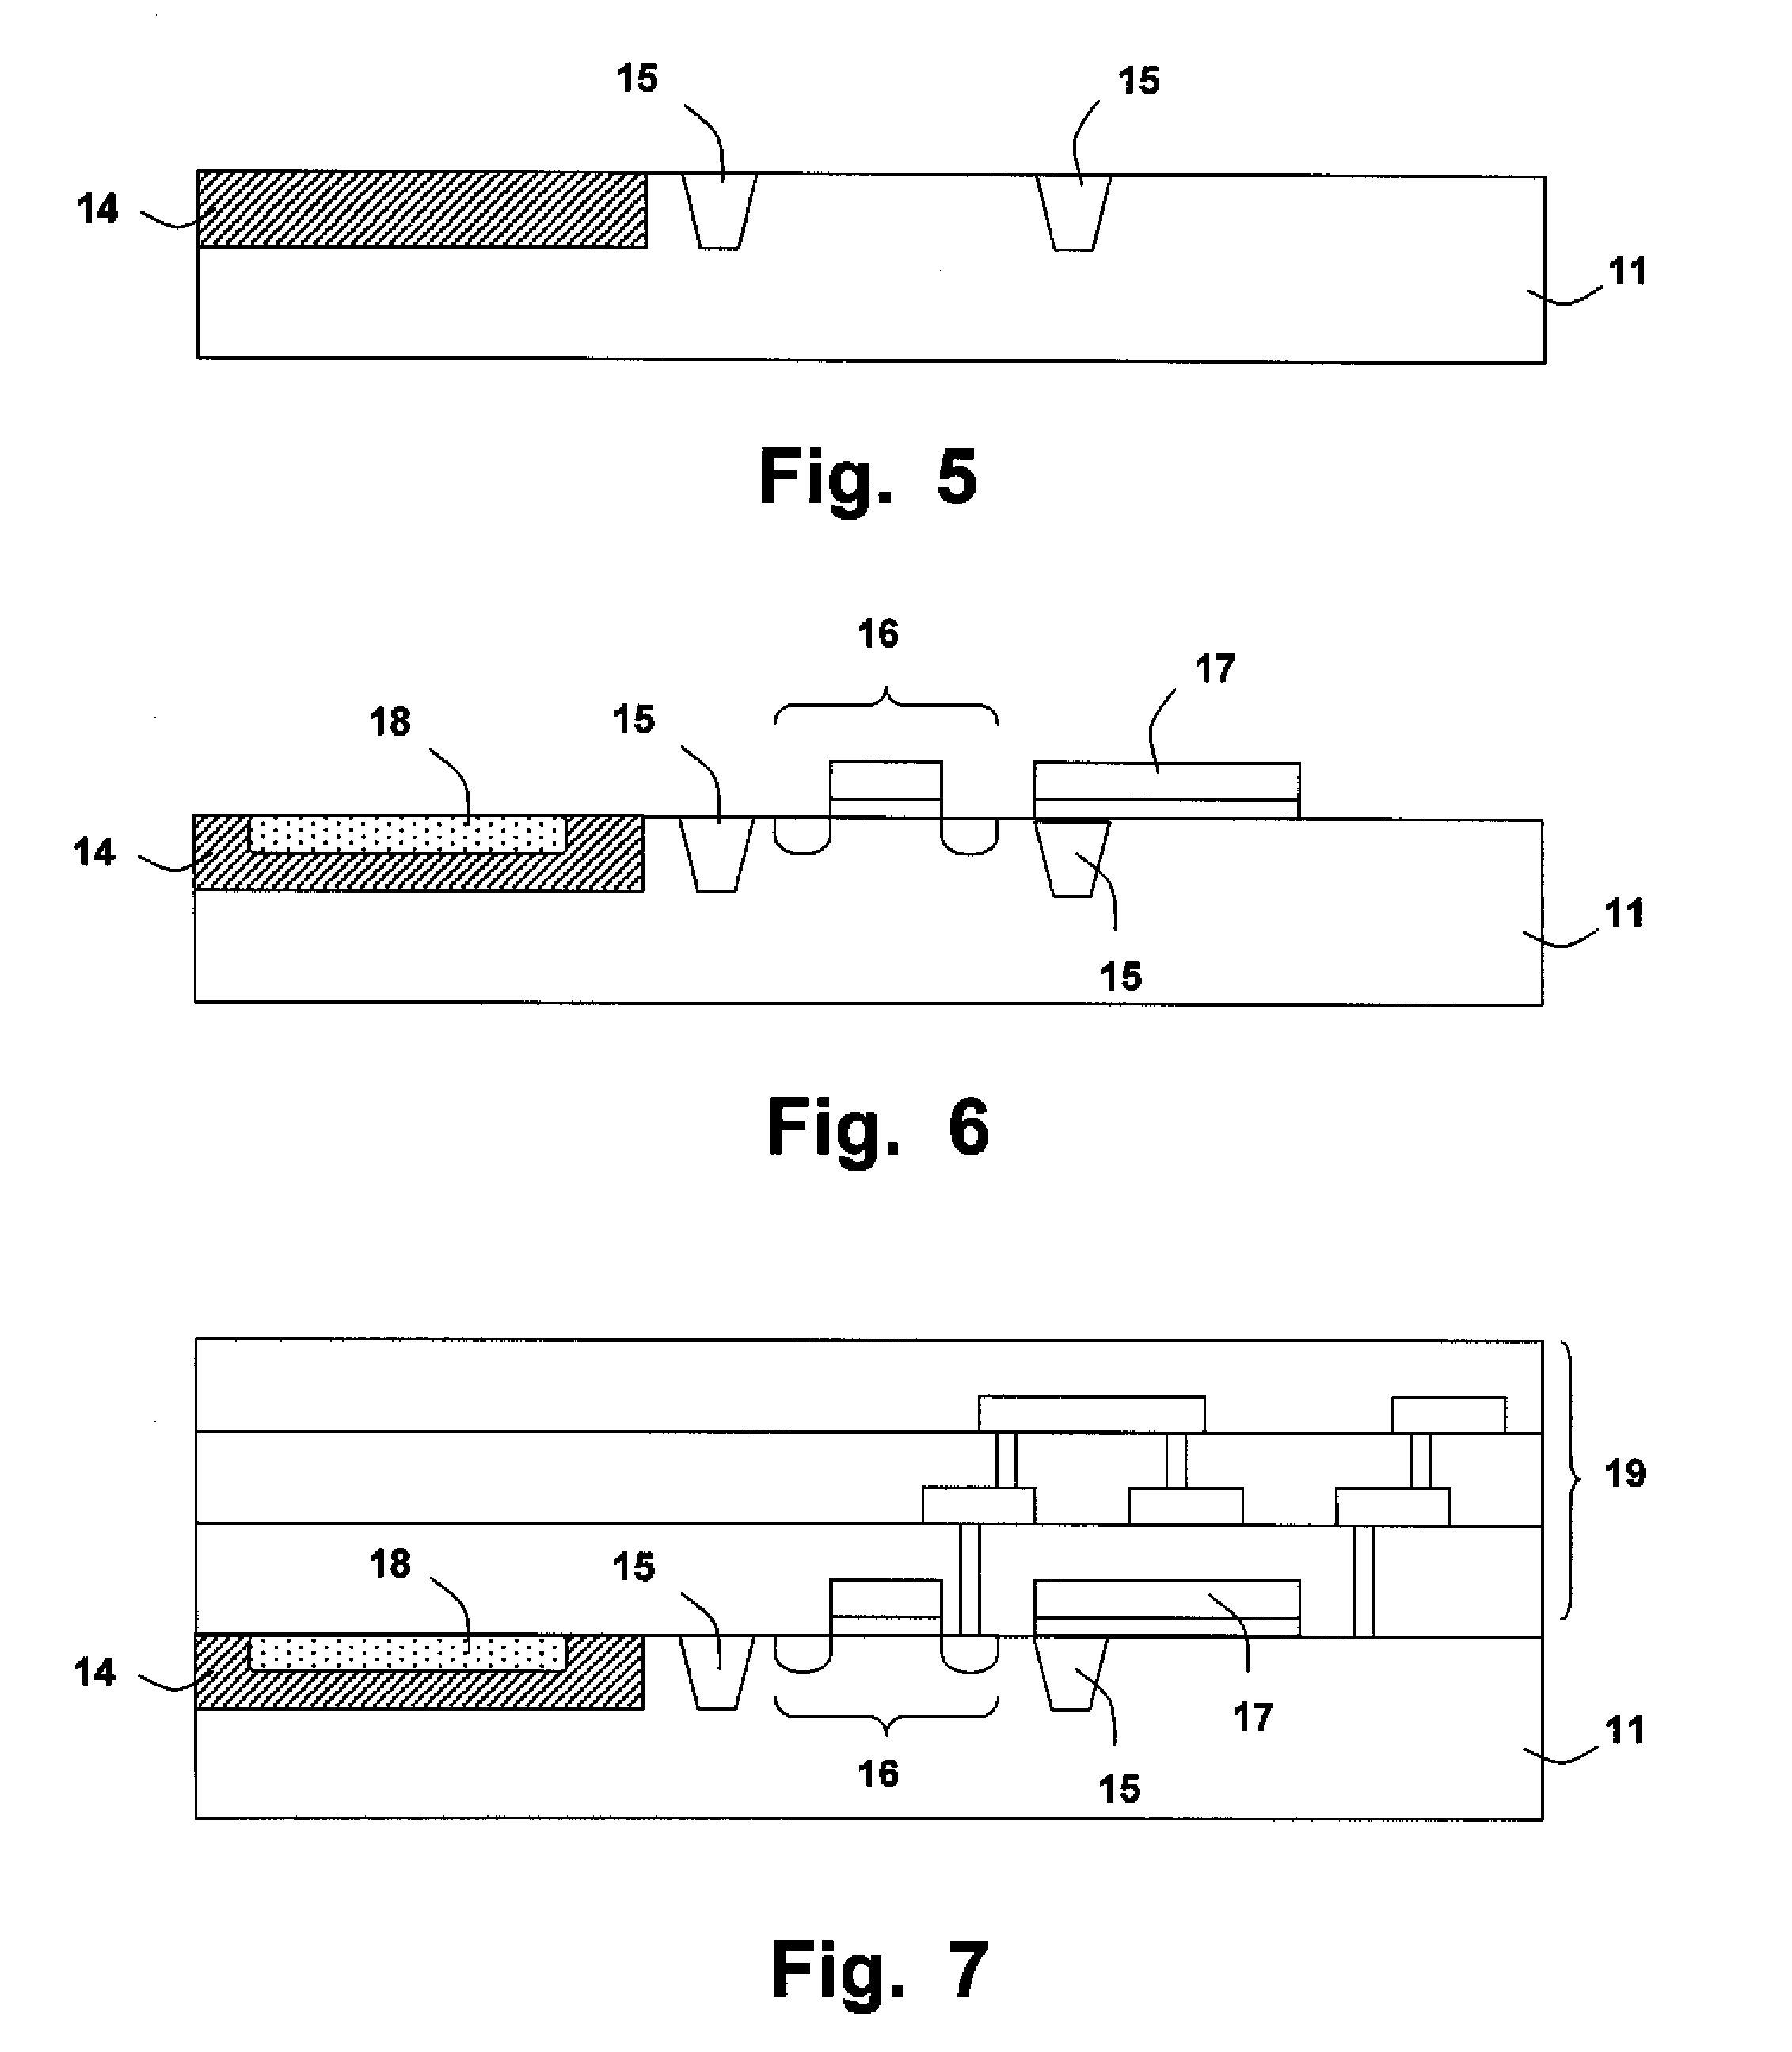 Optoelectronic device and process for making same